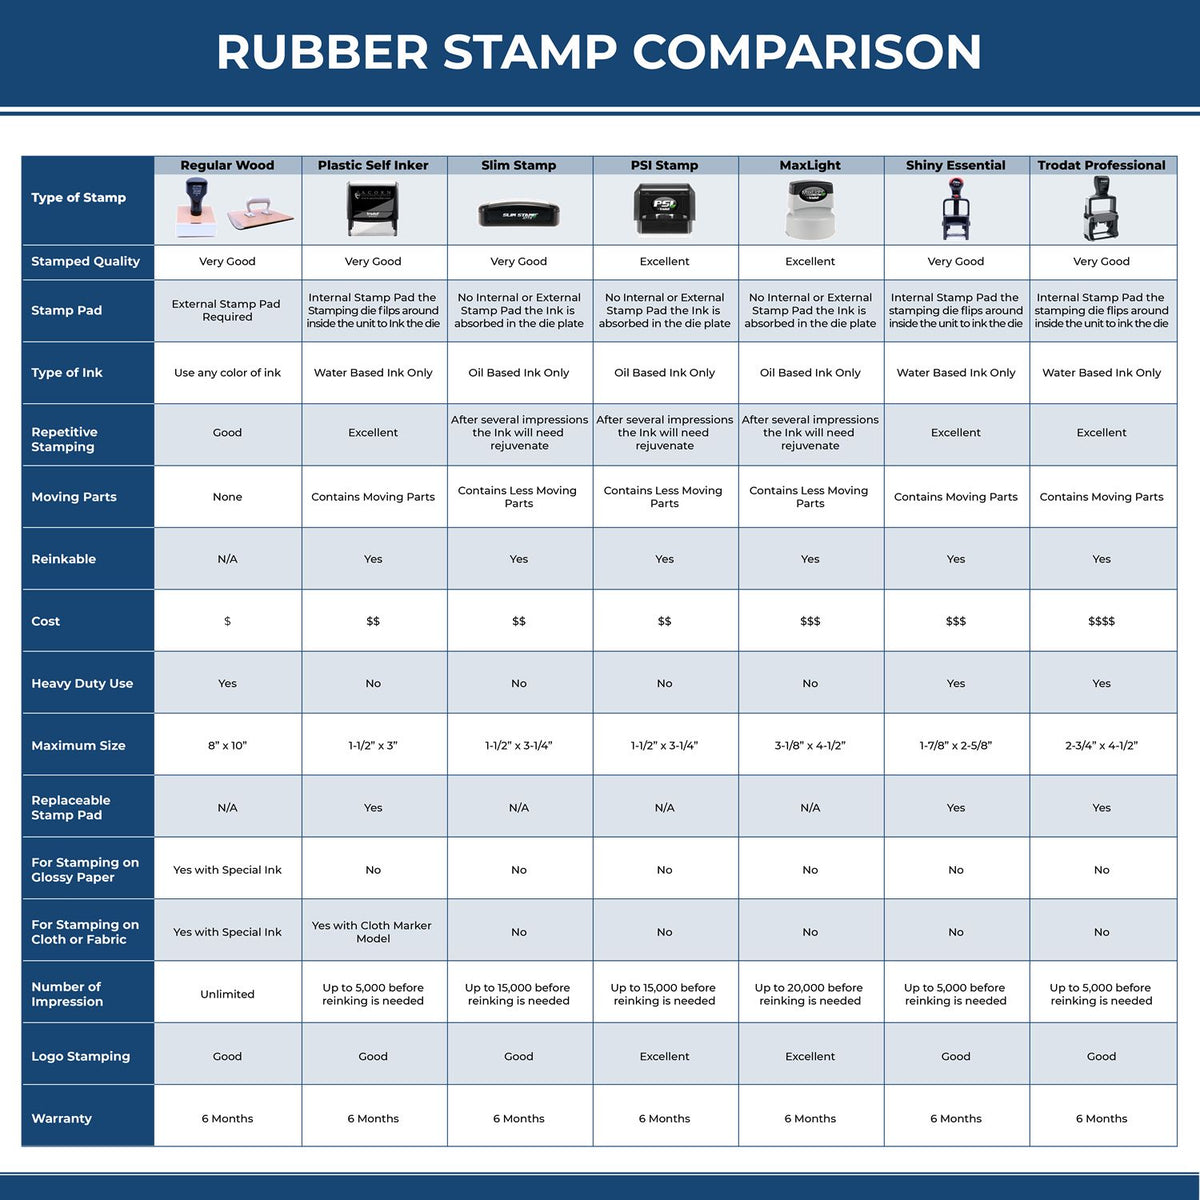 A comparison chart for the different types of mount models available for the Utah Professional Engineer Seal Stamp.